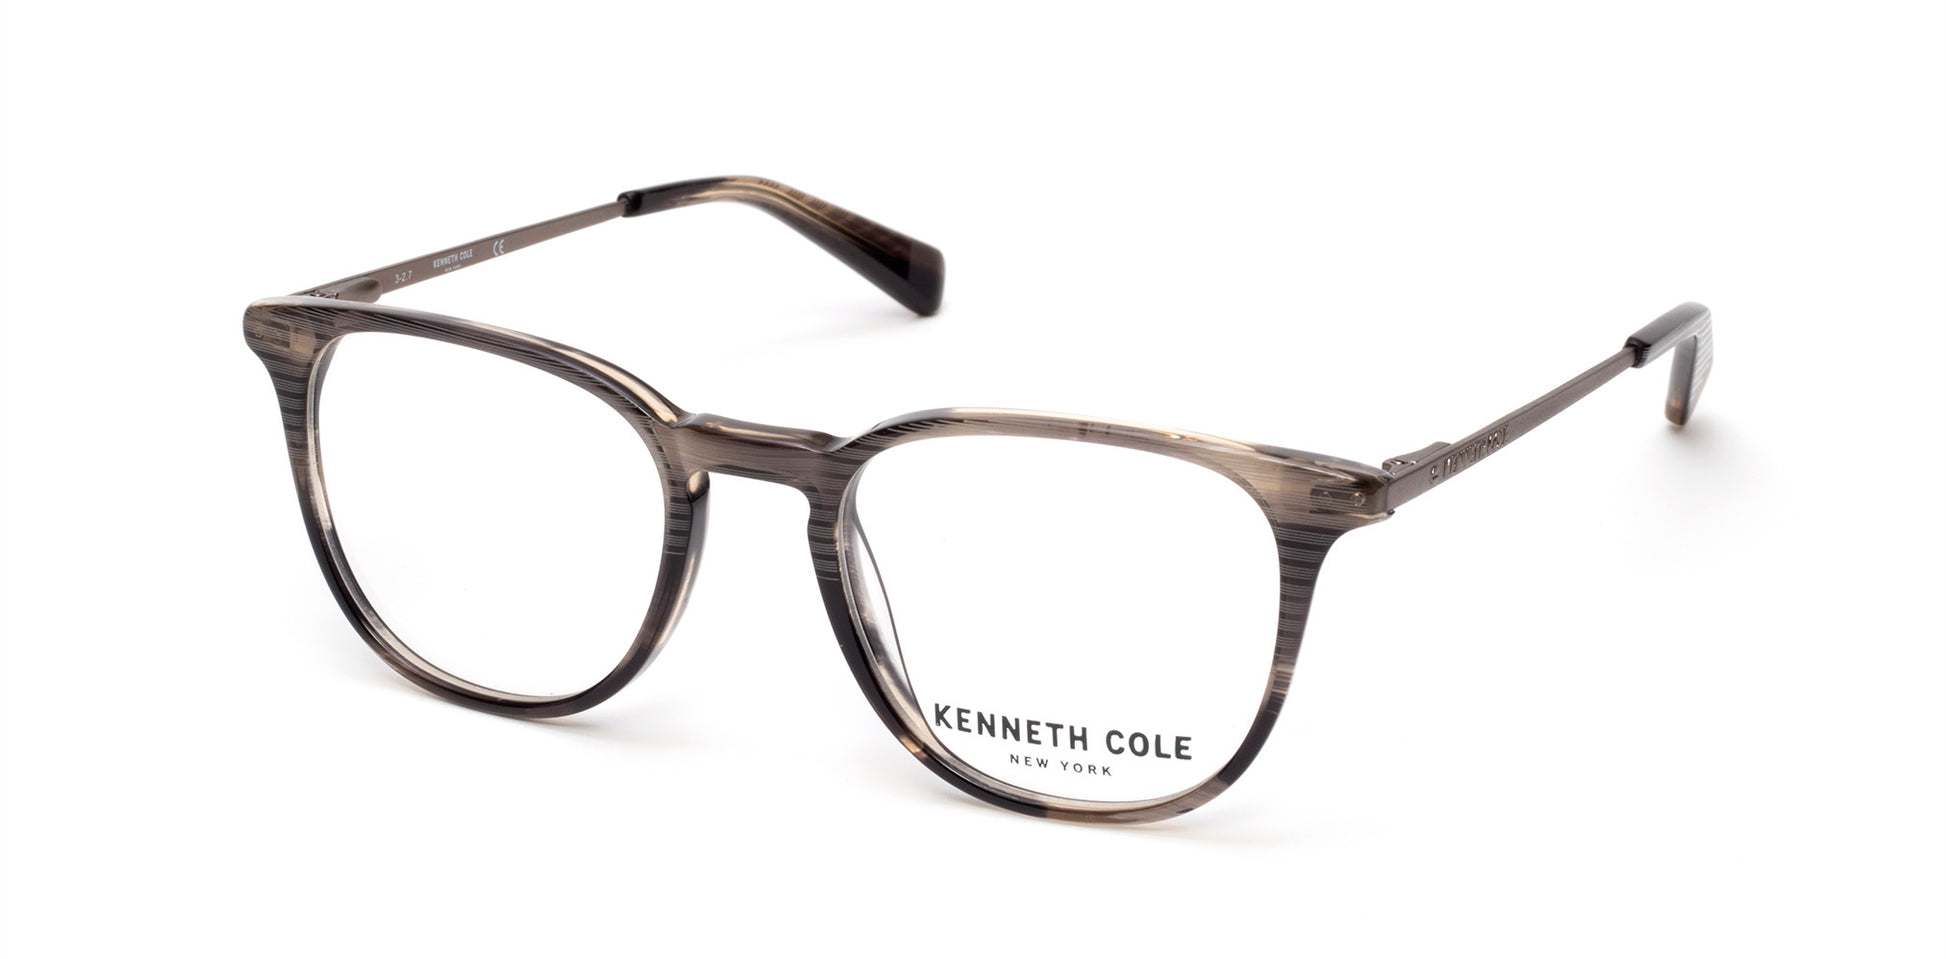 Kenneth Cole New York,Kenneth Cole Reaction KC0273 Round Eyeglasses 020-020 - Grey